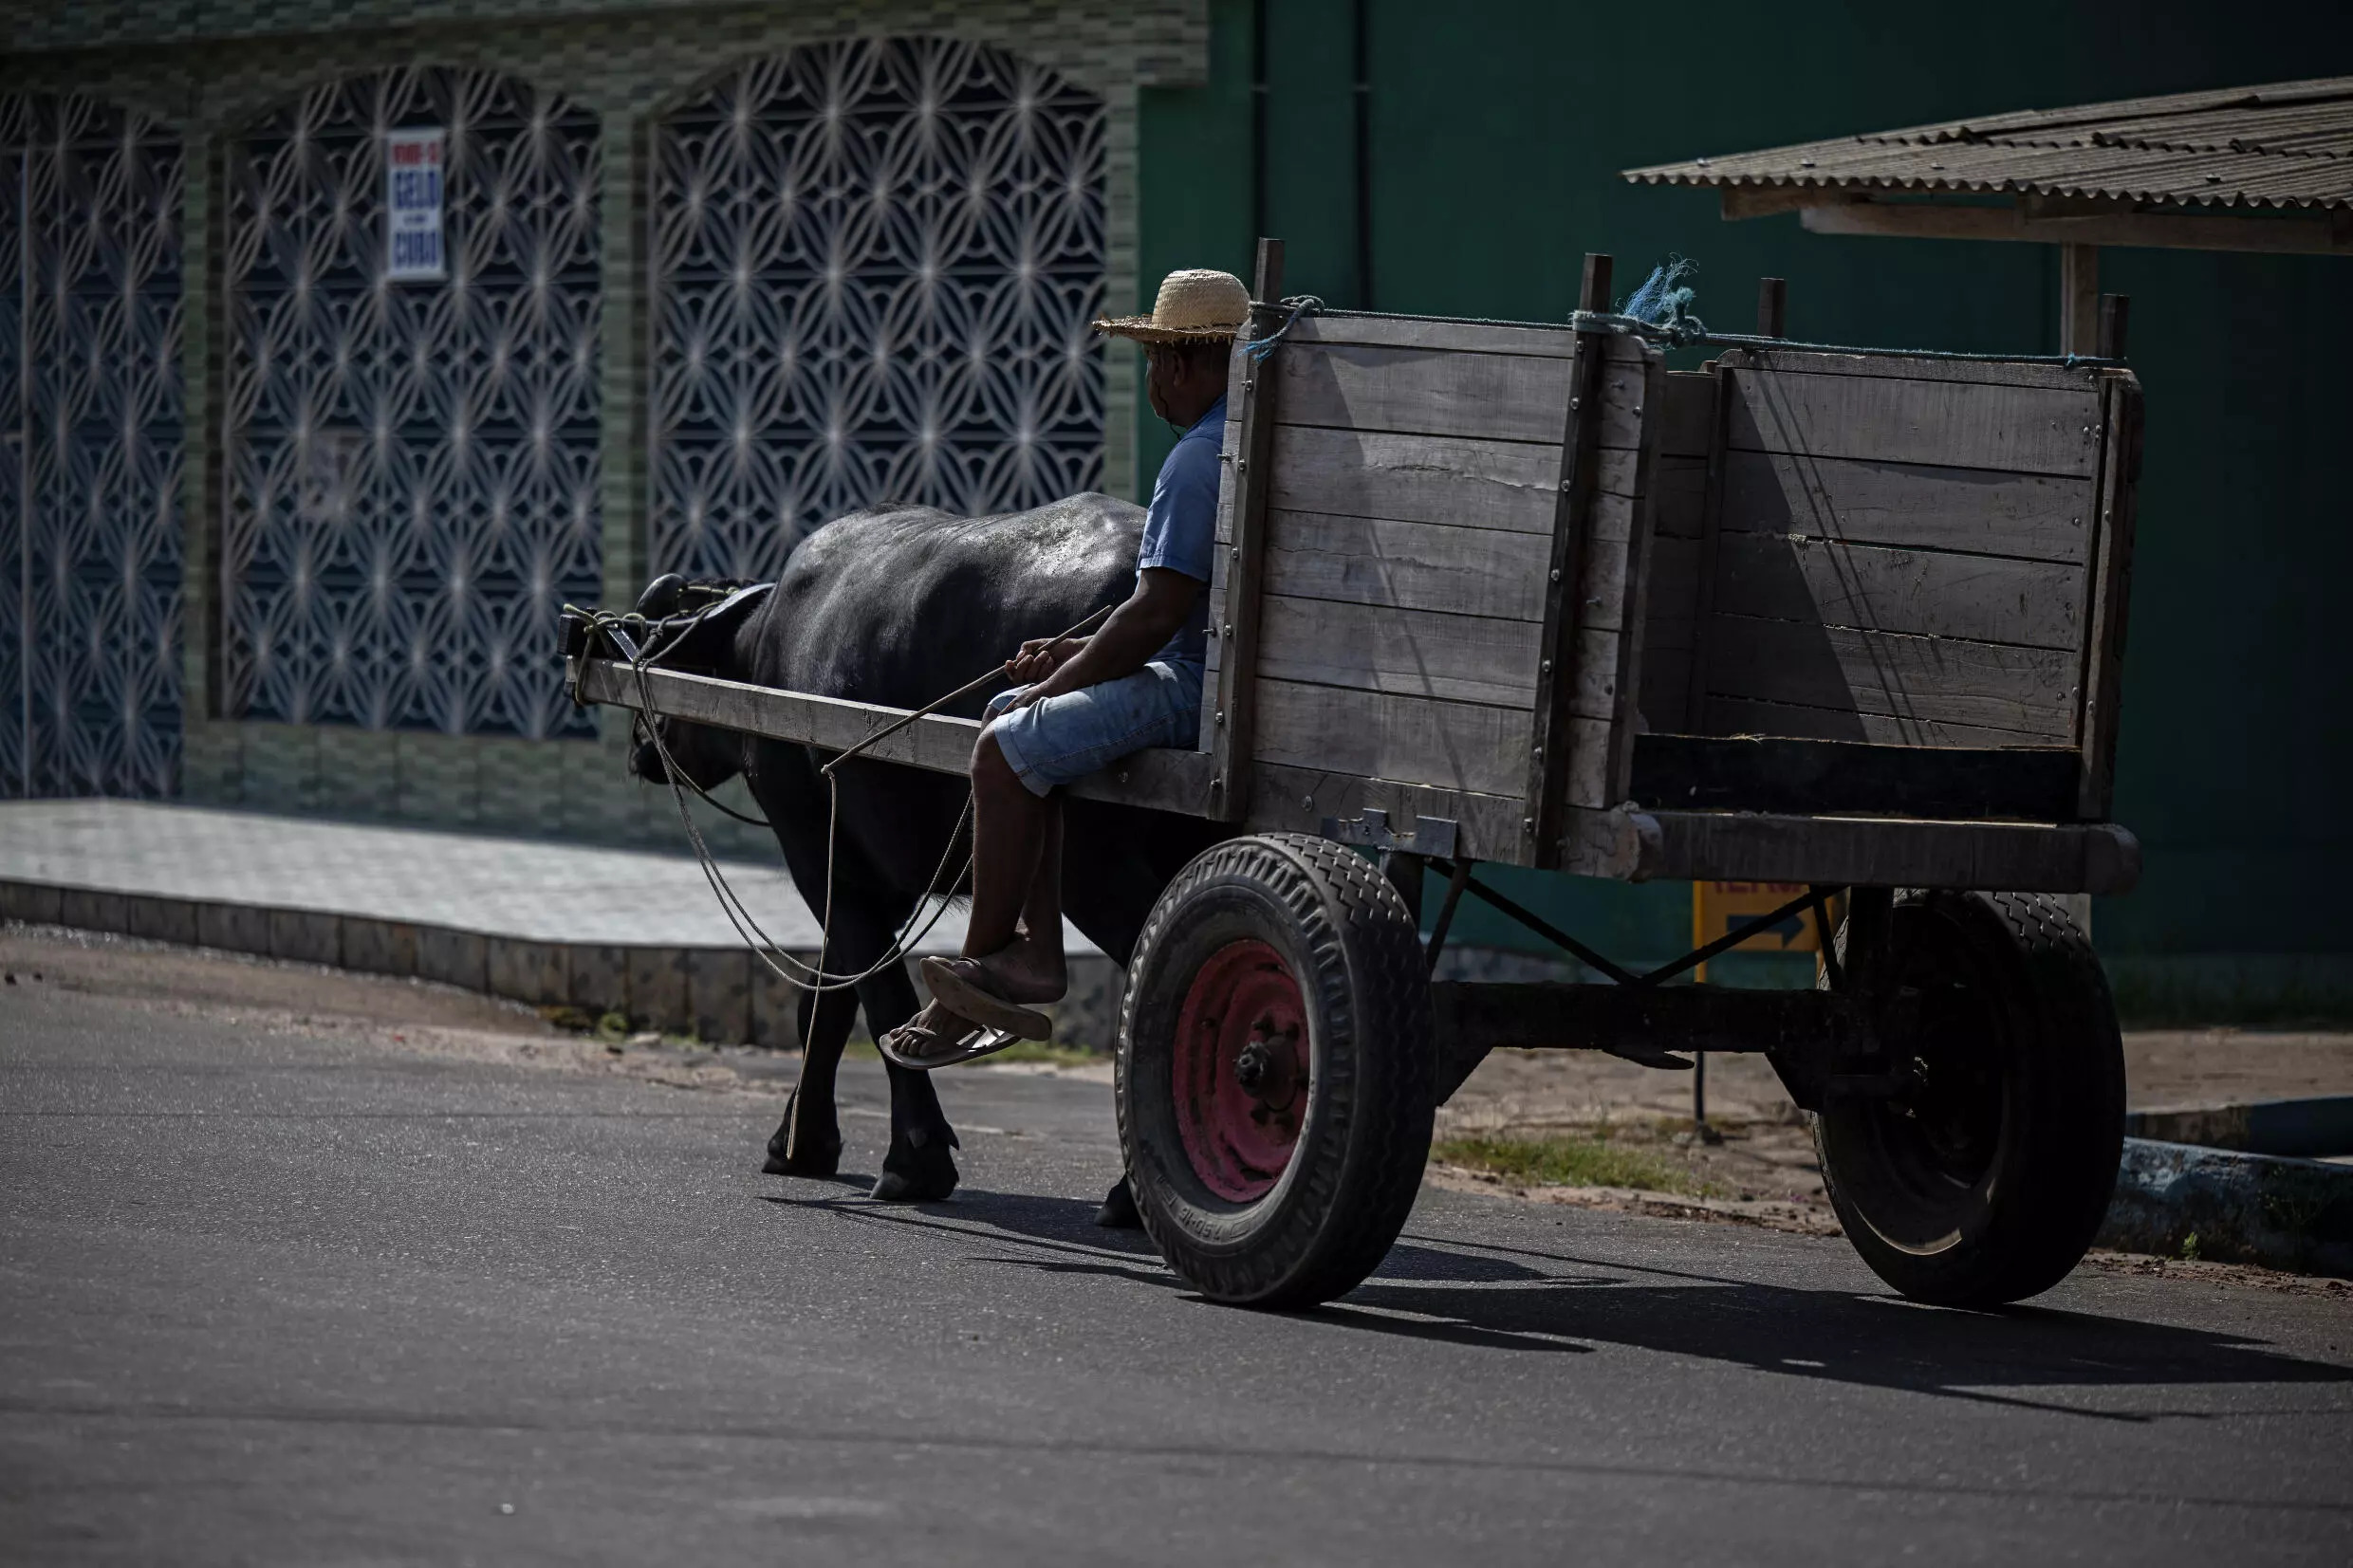 Buffalo are used to drag carriages in the town of Soure. Photo: AFP